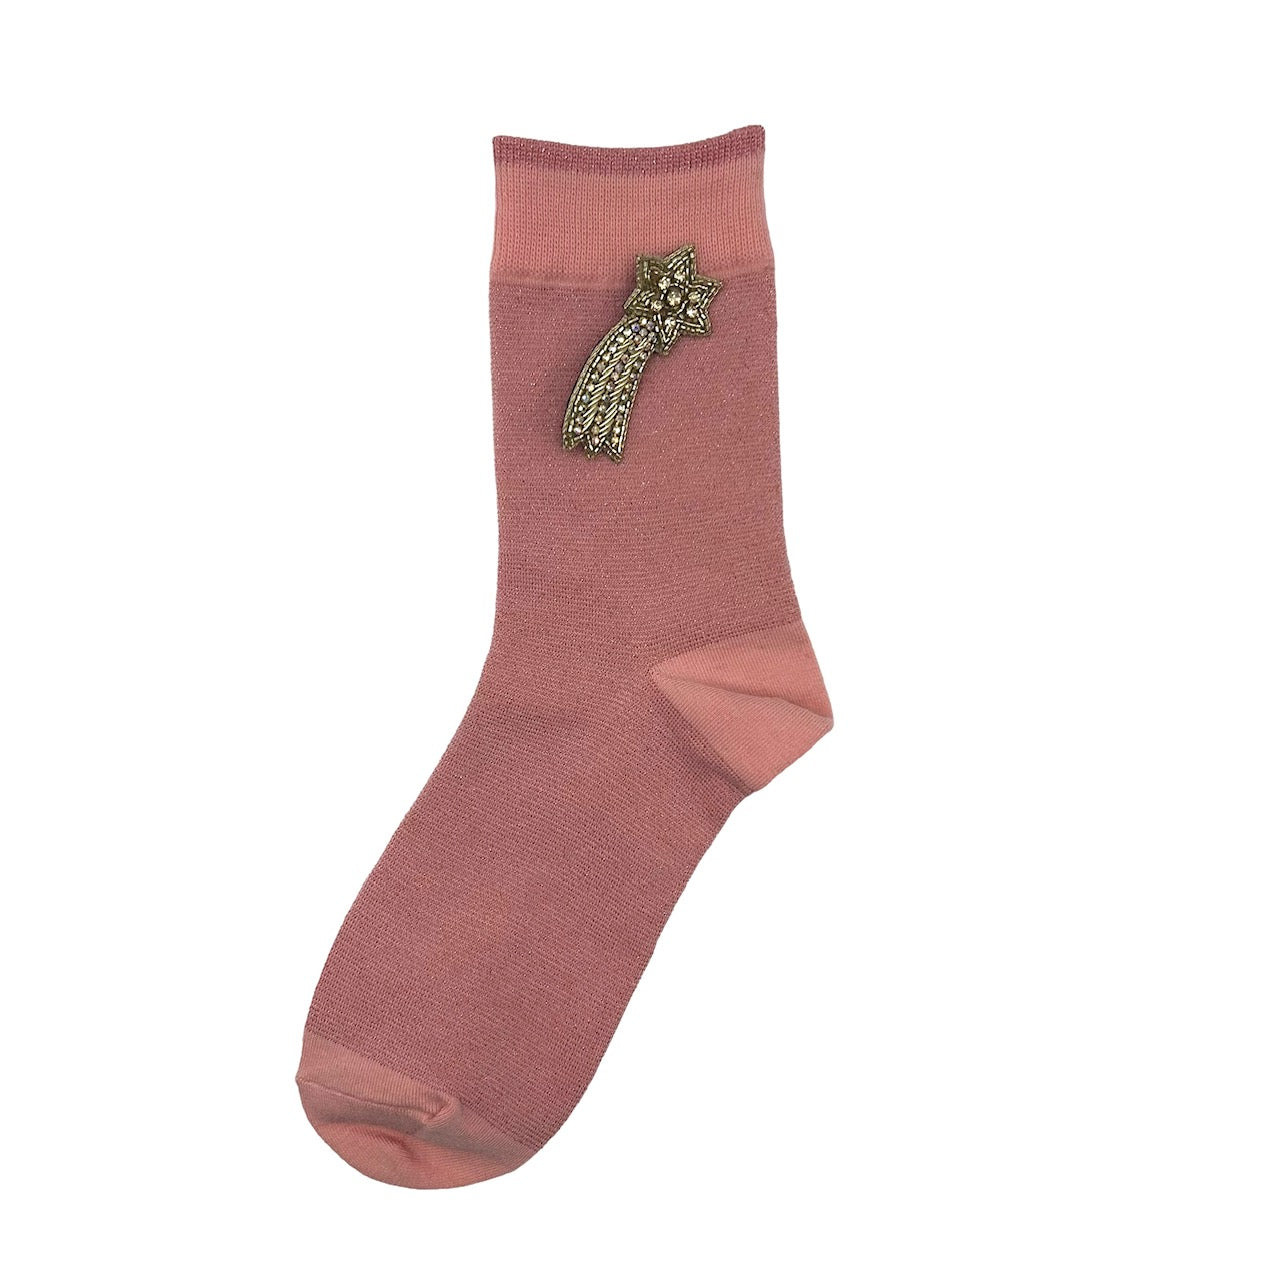 Tokyo socks in  pink with a shooting star brooch